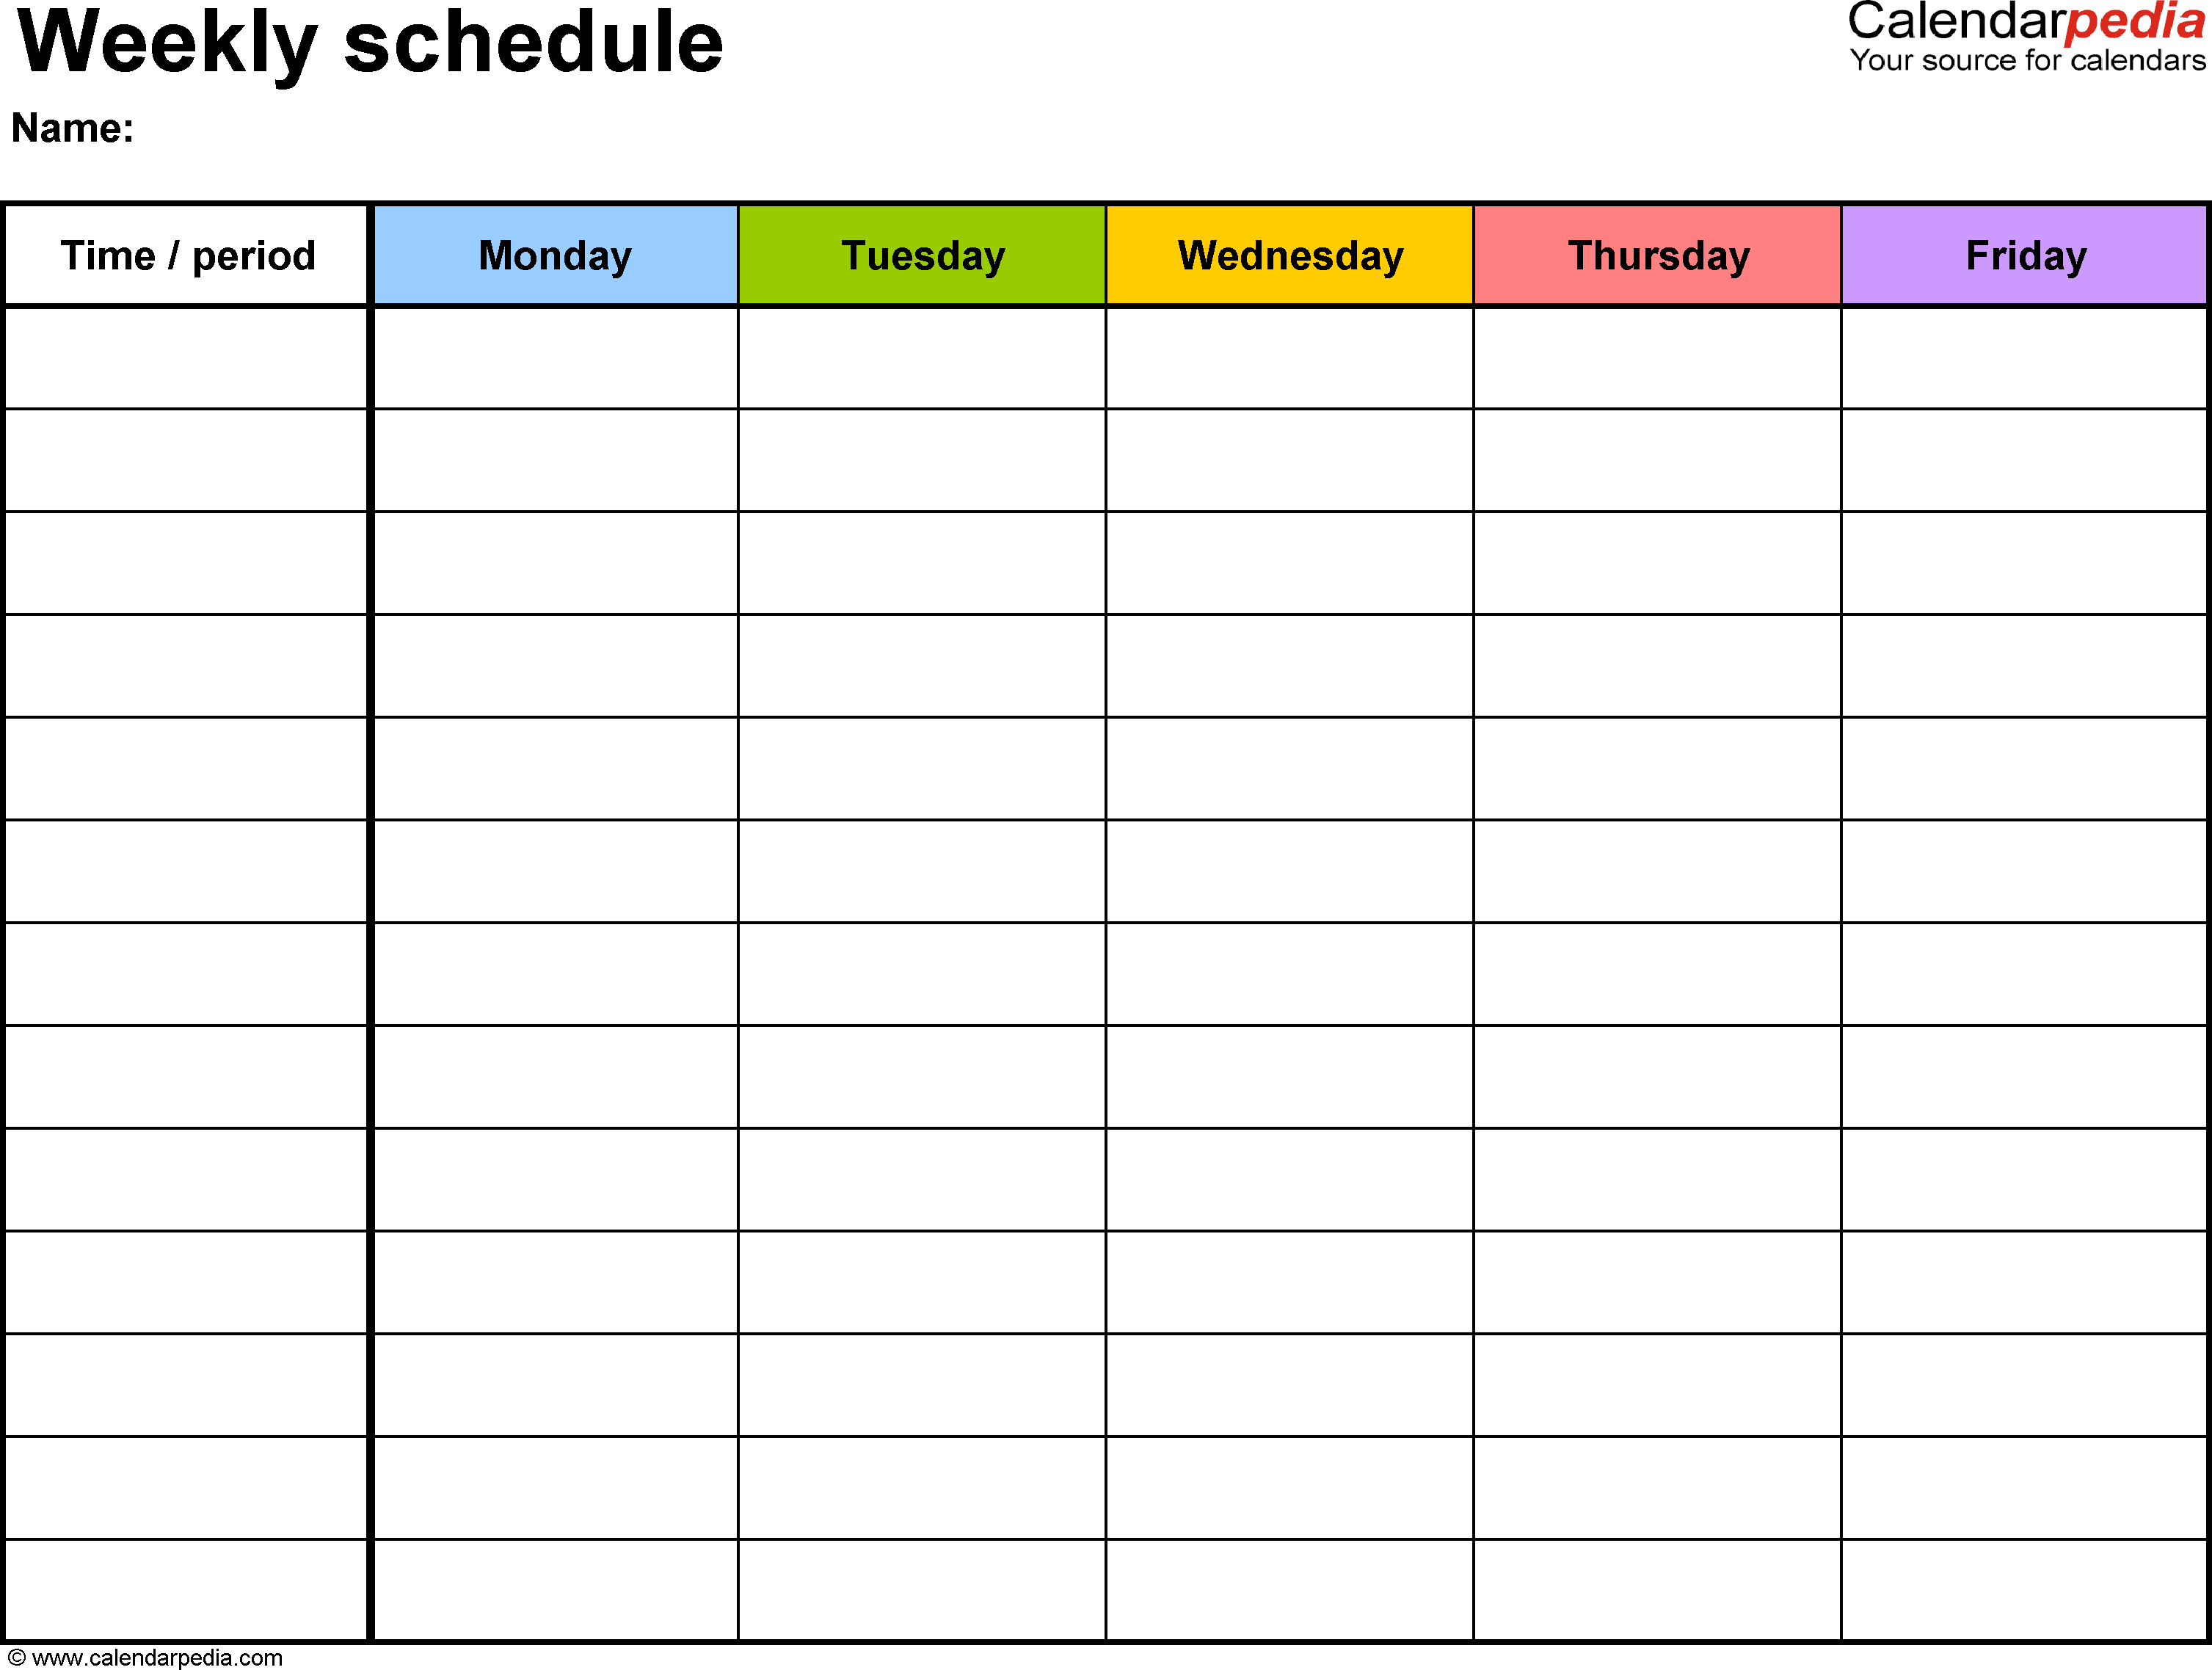 Free Weekly Schedule Templates For Excel - 18 Templates to Excel Spreadsheet Template Scheduling